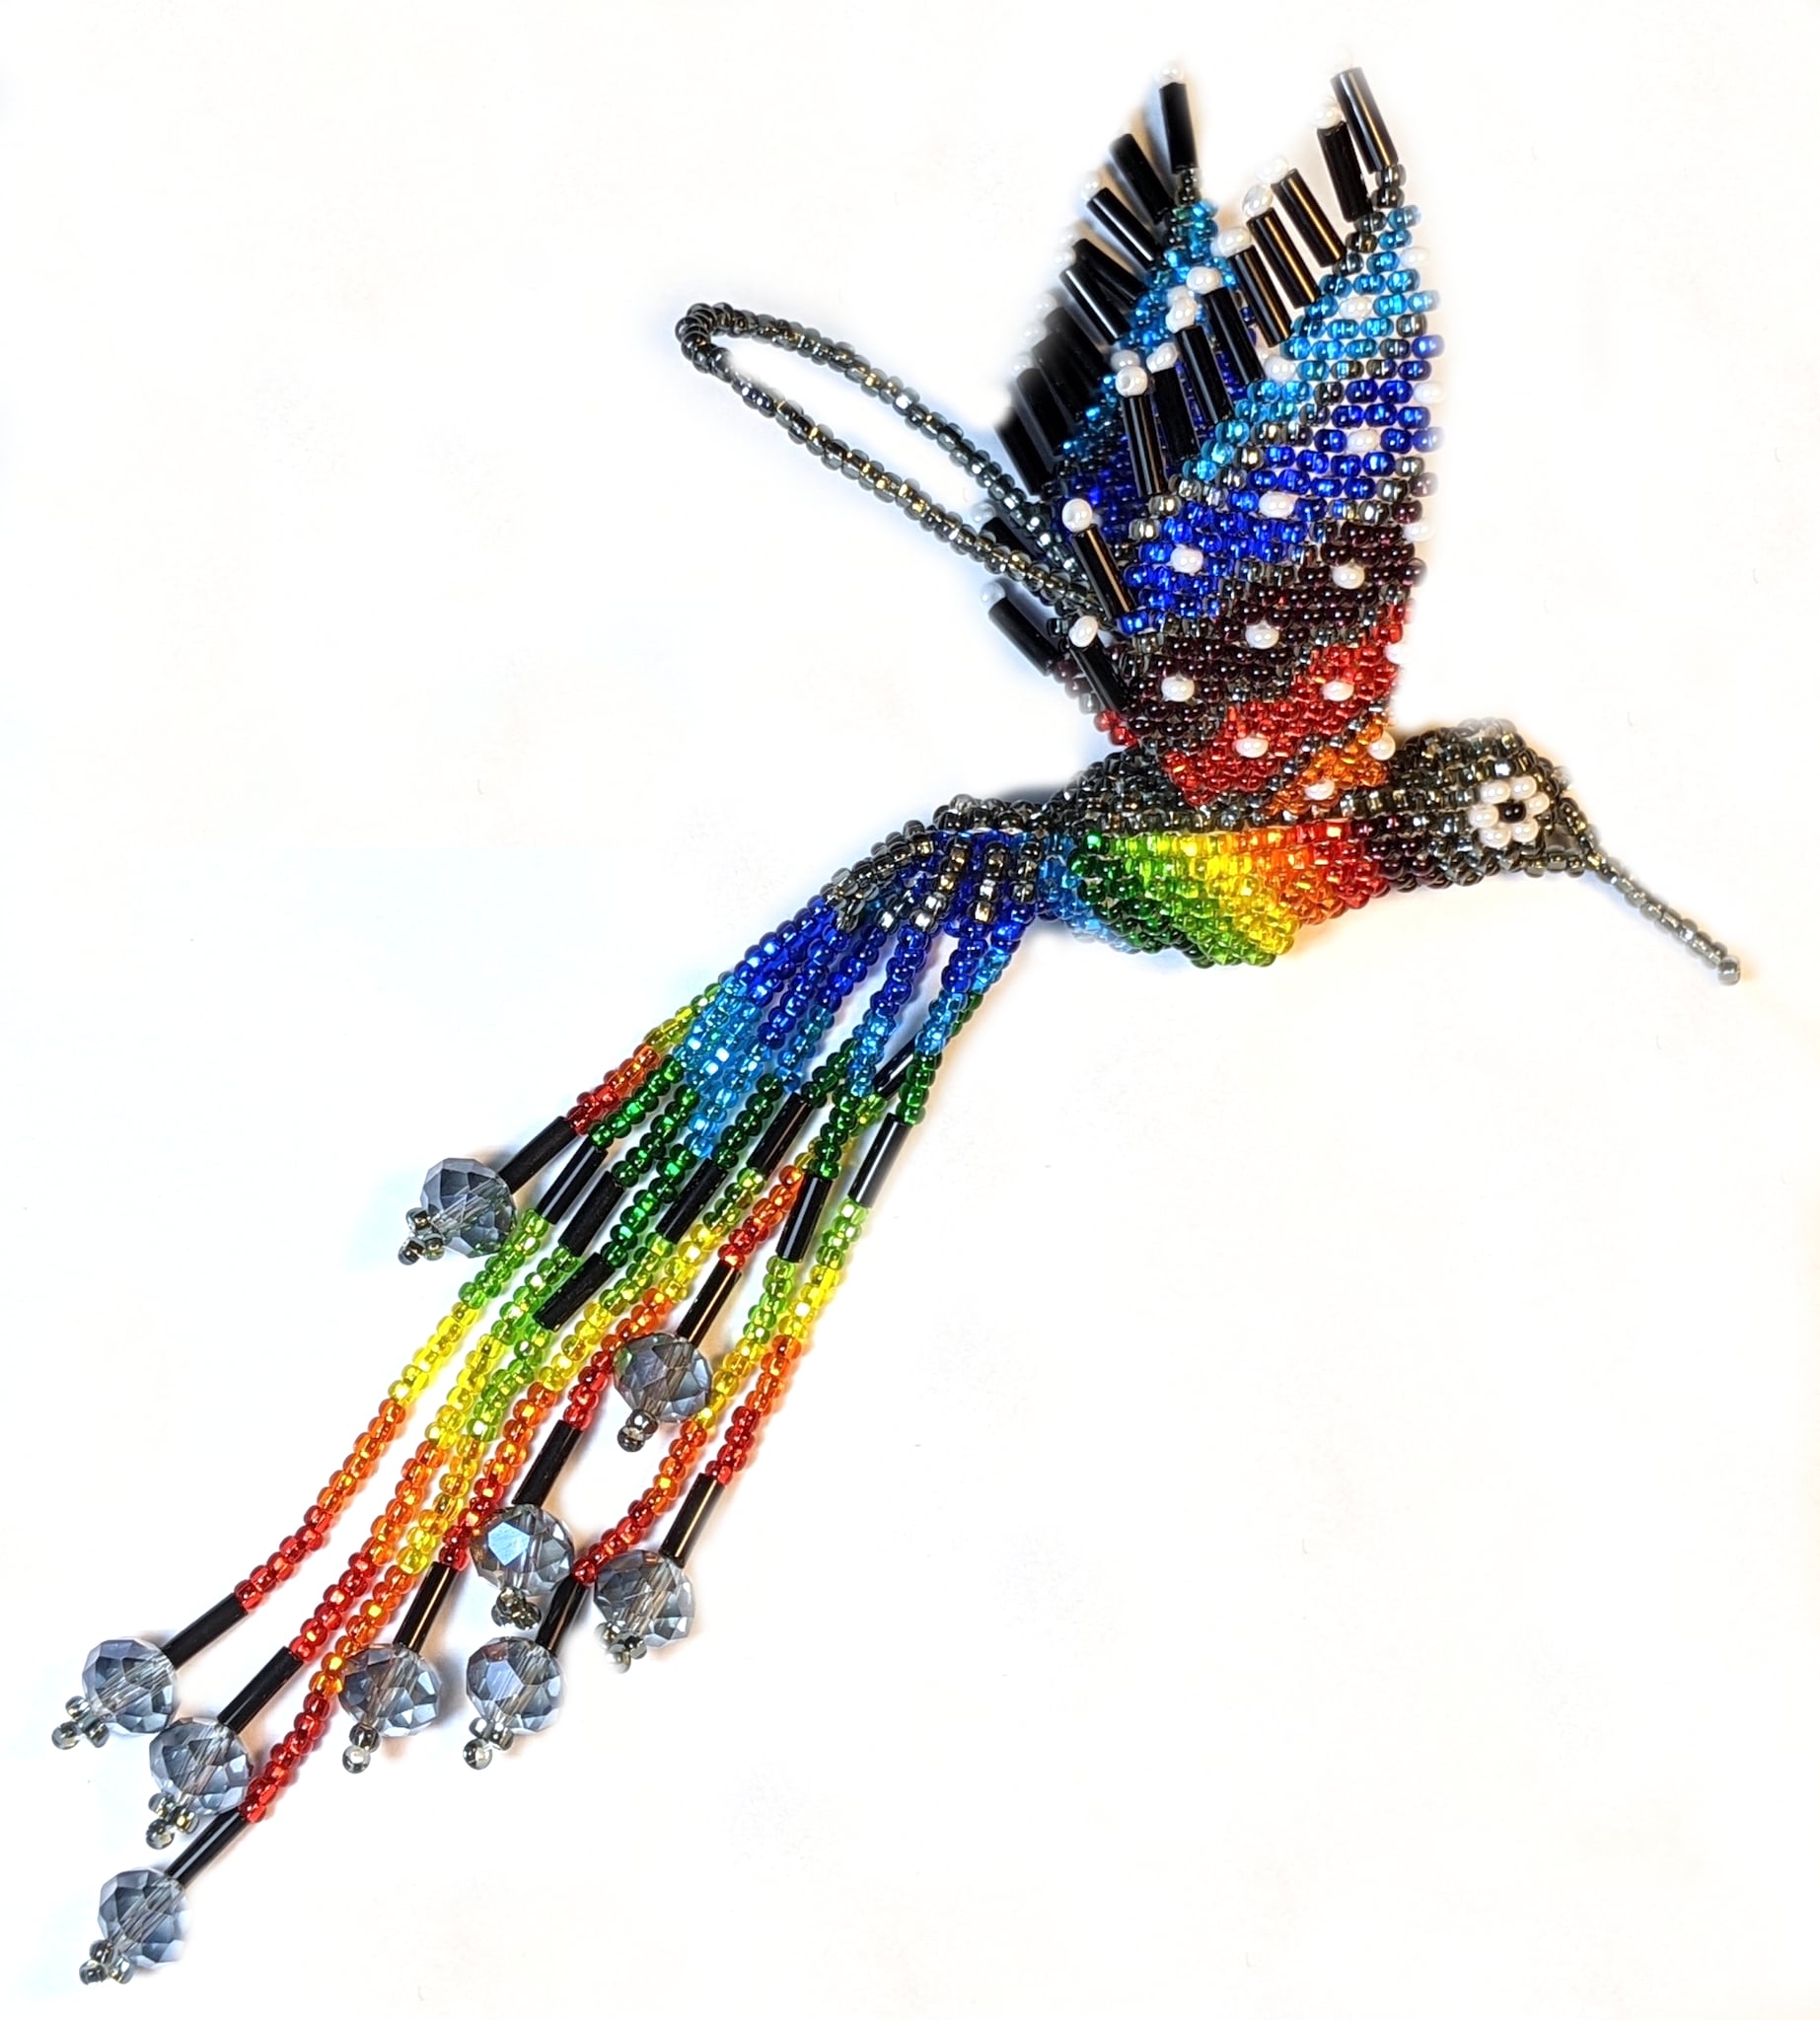 Hummingbird Beaded Ornament - Rainbow with Silver Gray and Pearl White Accents